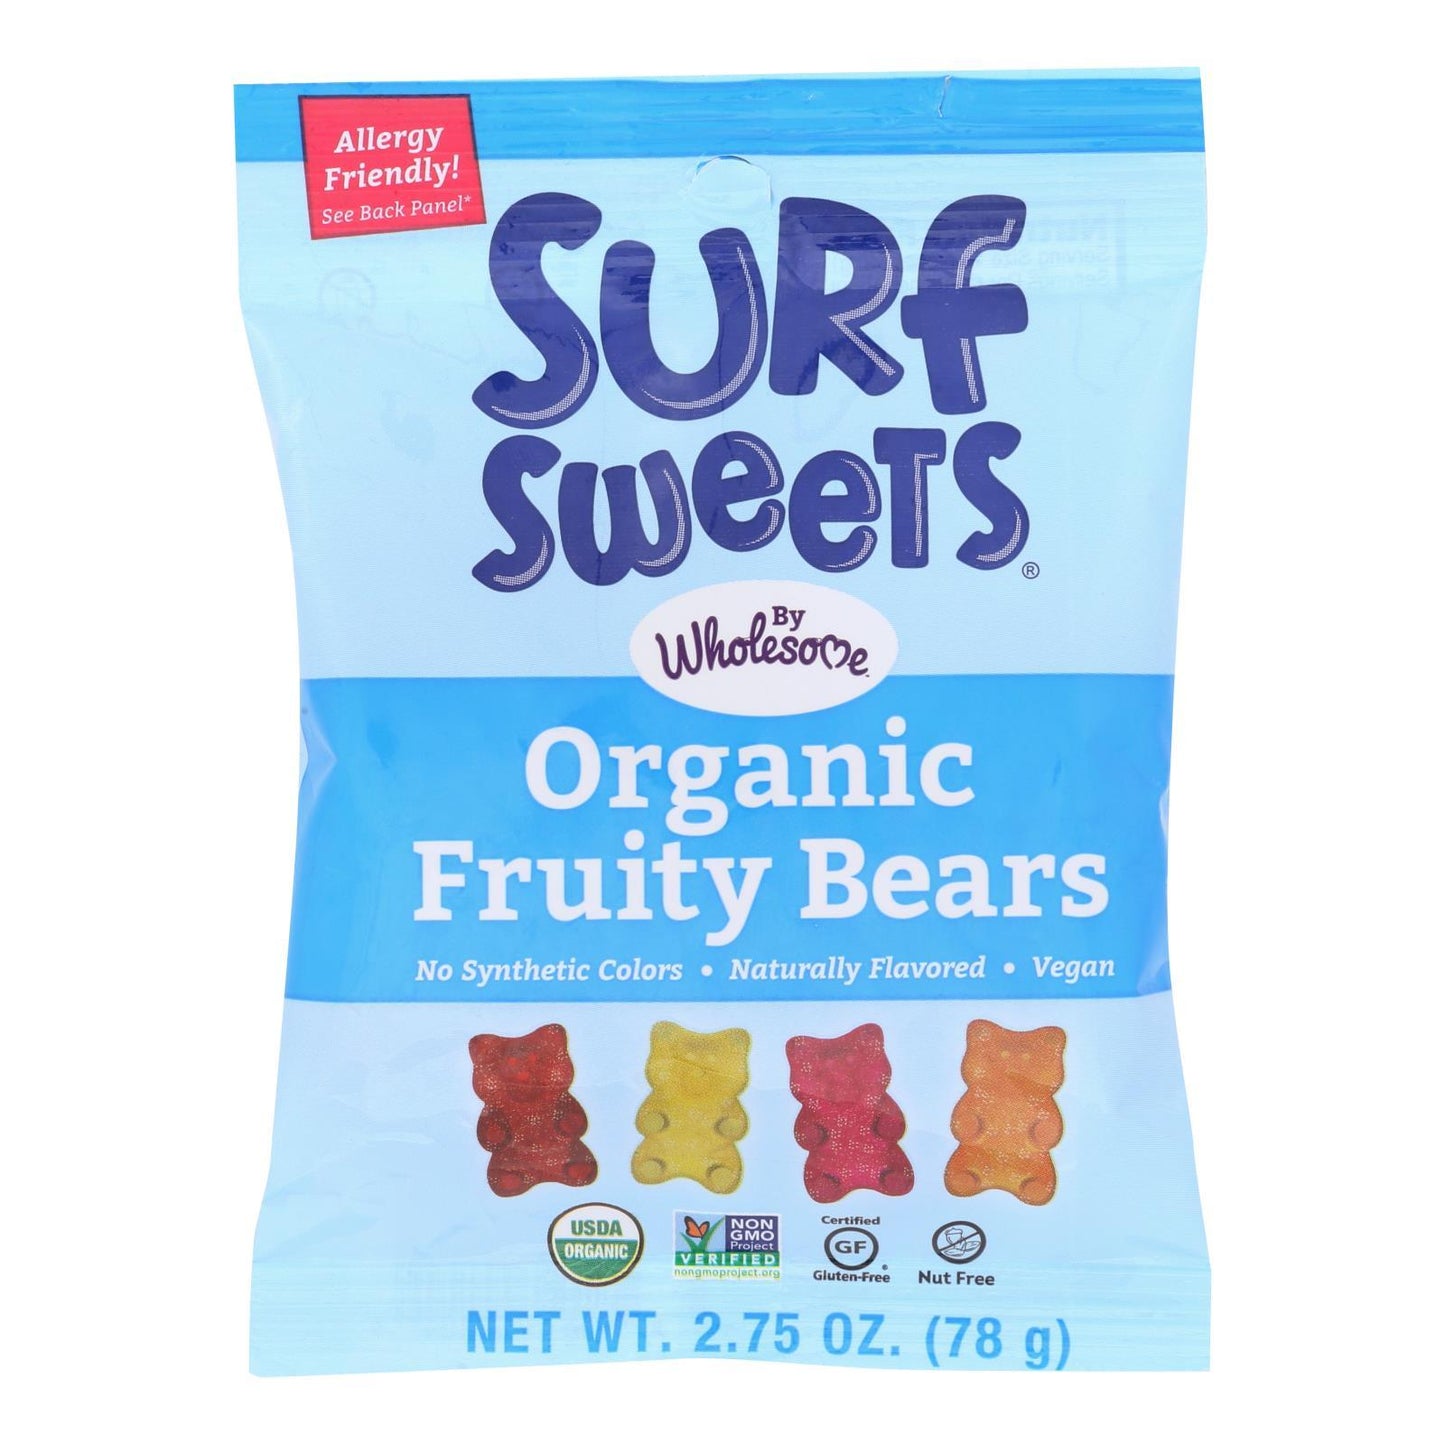 Surf Sweets Organic Fruity Bears - Case Of 12 - 2.75 Oz.